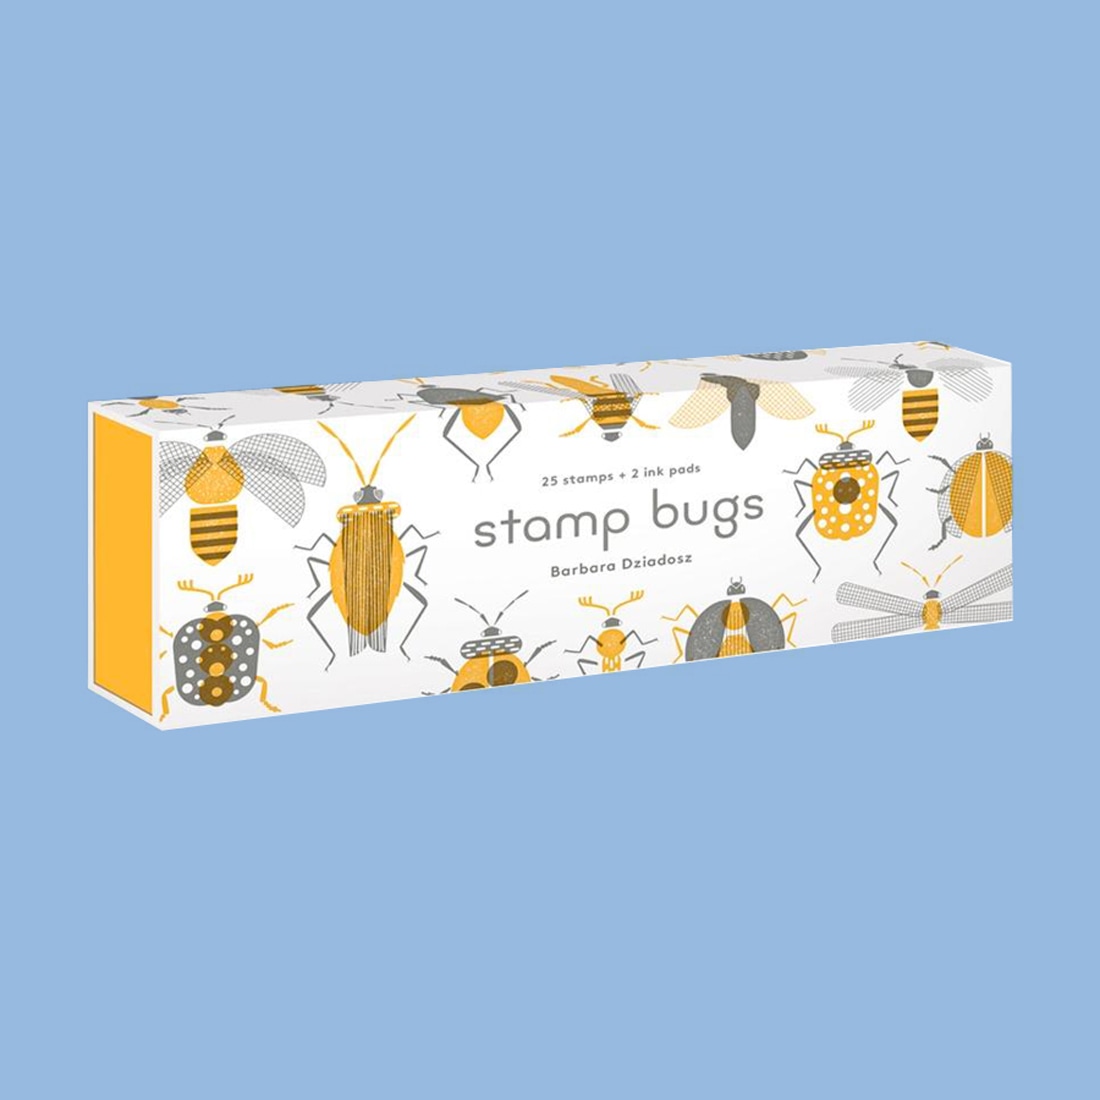 Stamp Bugs 25 stamps + 2 ink pads